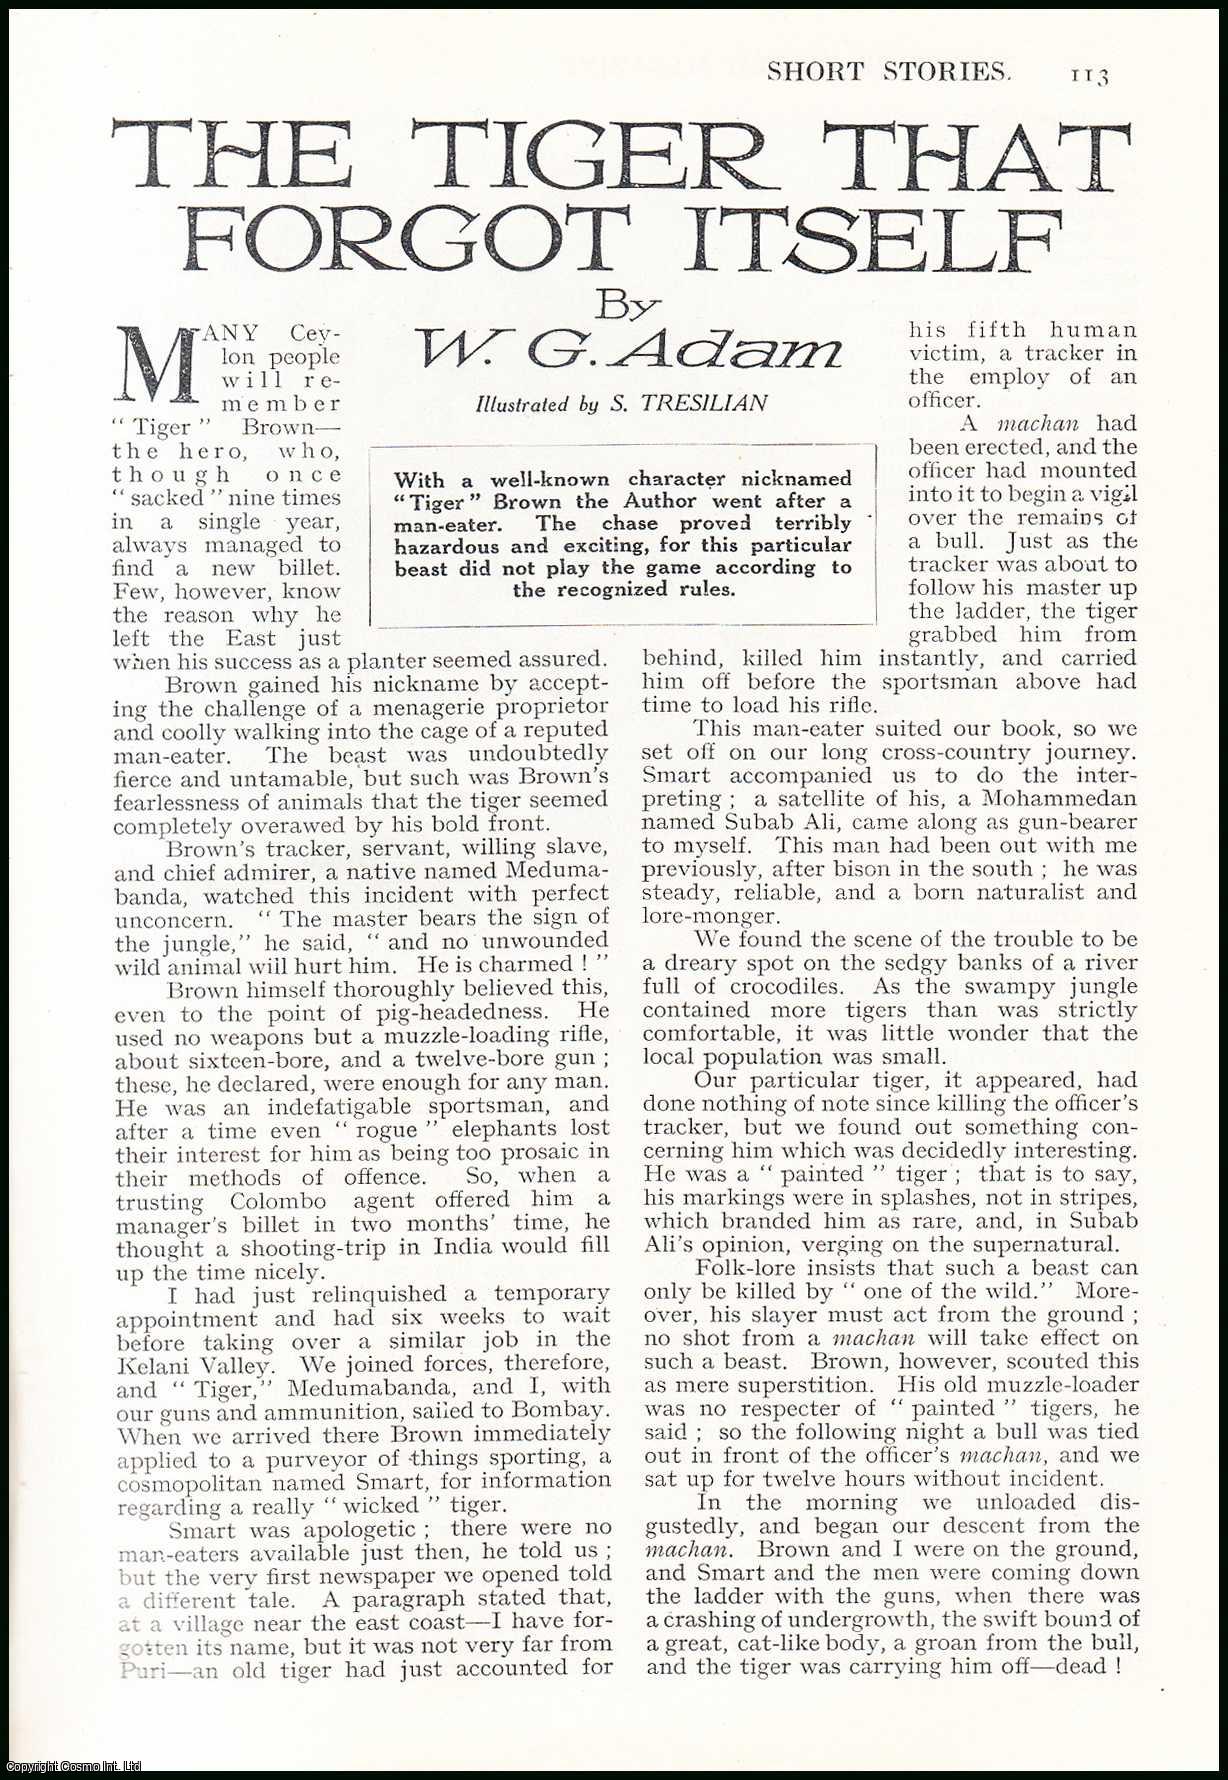 W.G. Adam - The Tiger That Forgot Itself. An uncommon original article from the Wide World Magazine, 1932.